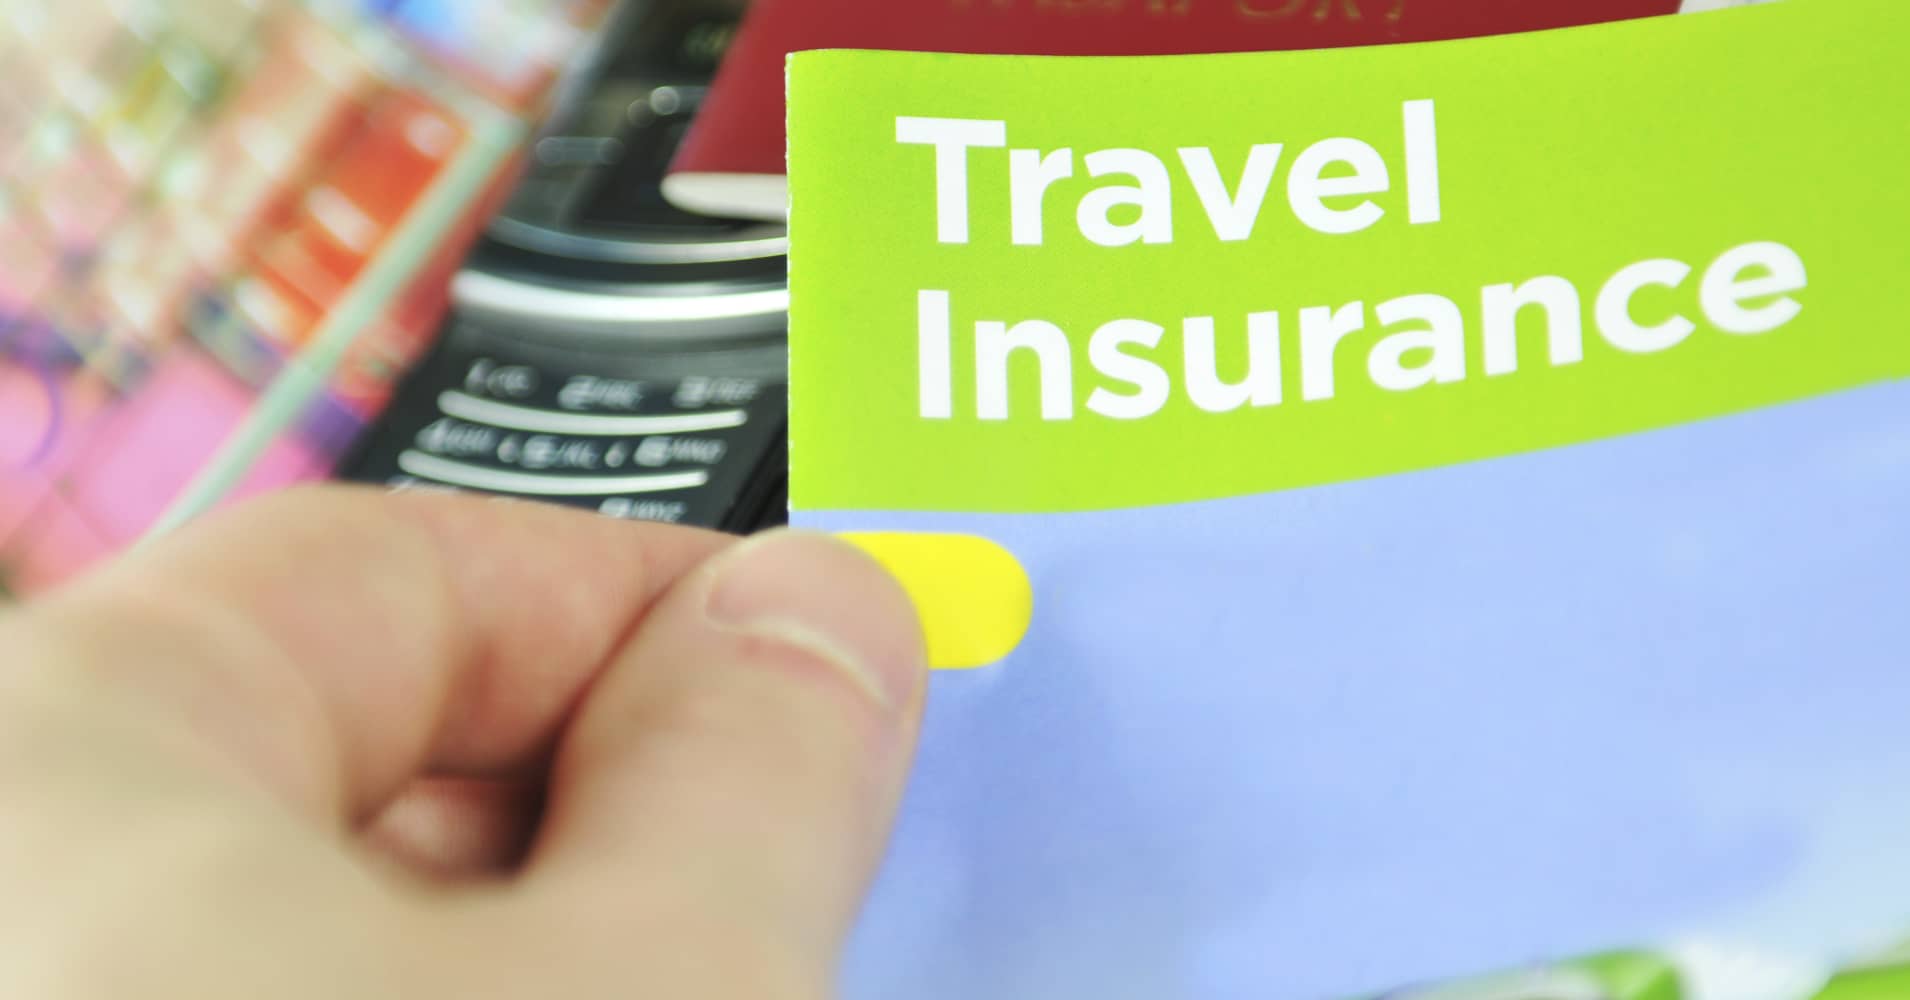 Do you need travel insurance for your summer trip?